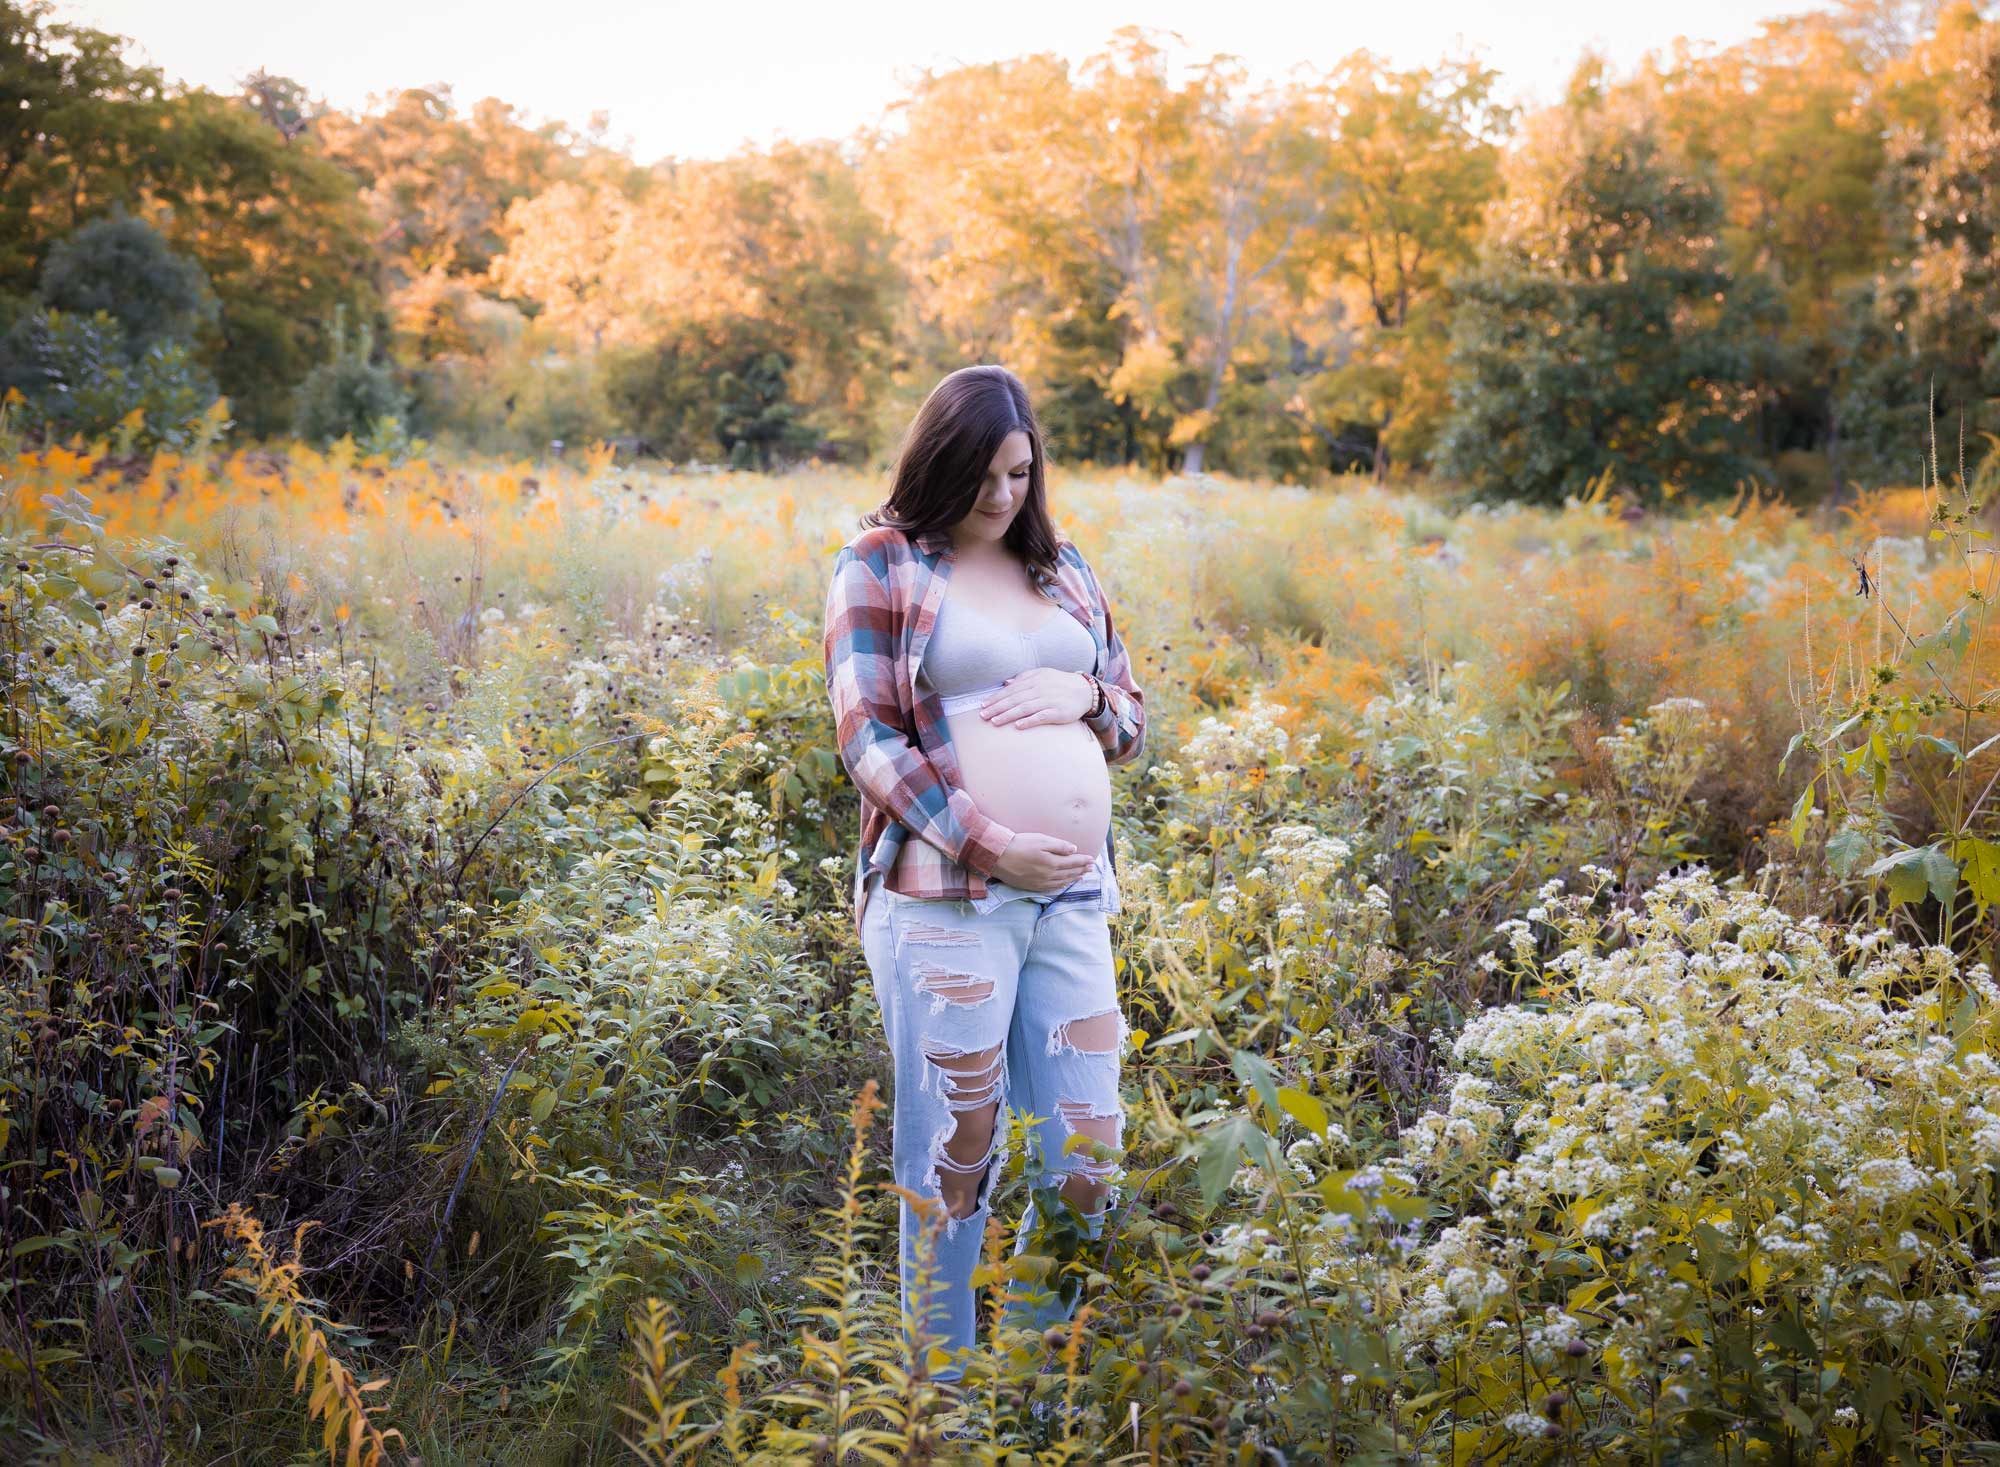 image-of-pregnant-woman-in-field-homepage